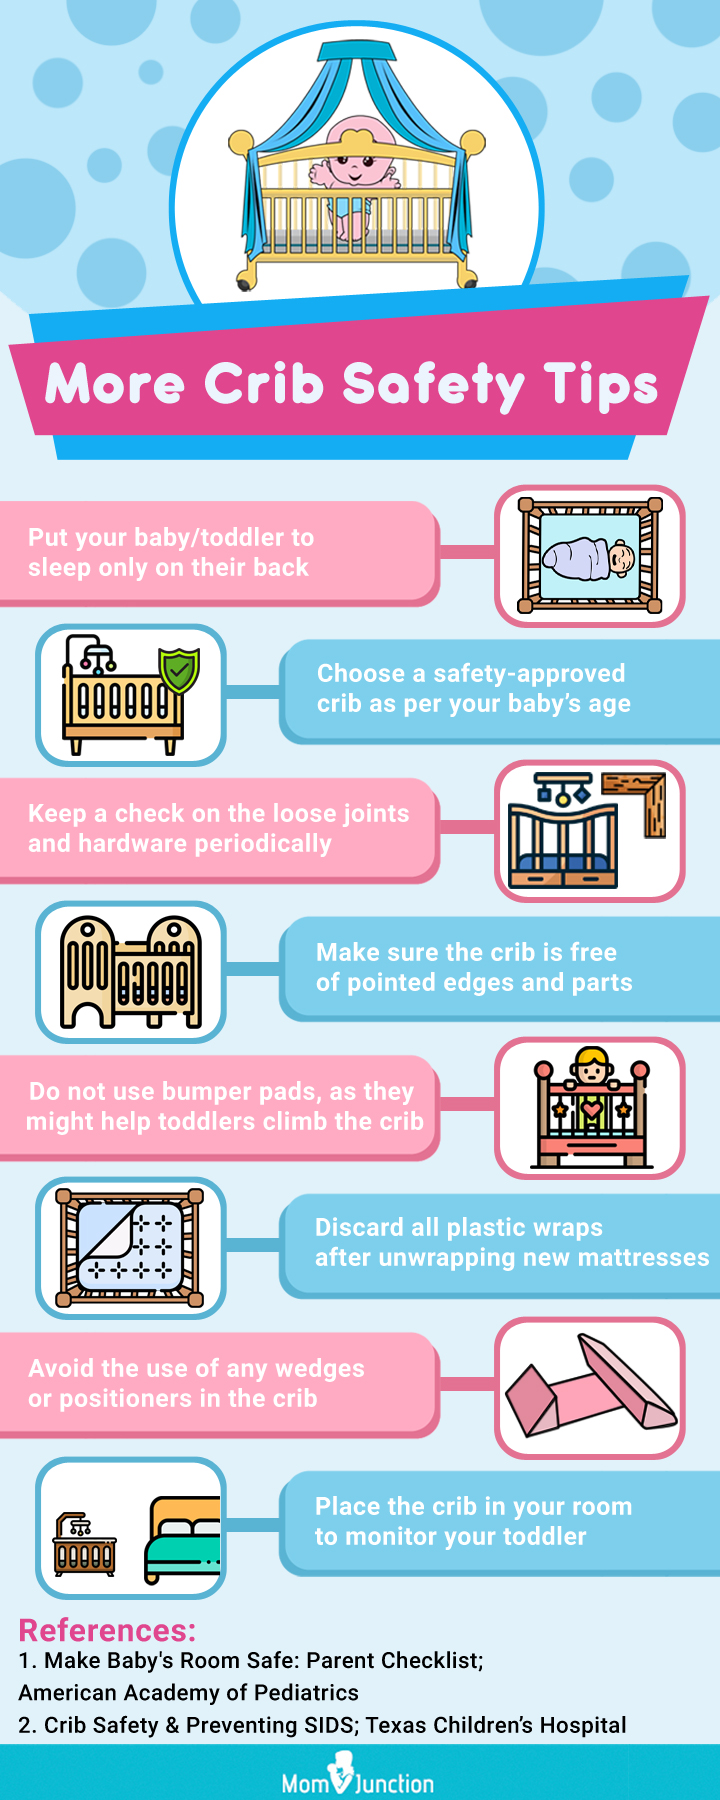 5 effective tips to prevent toddler climbing out of crib [infographic]